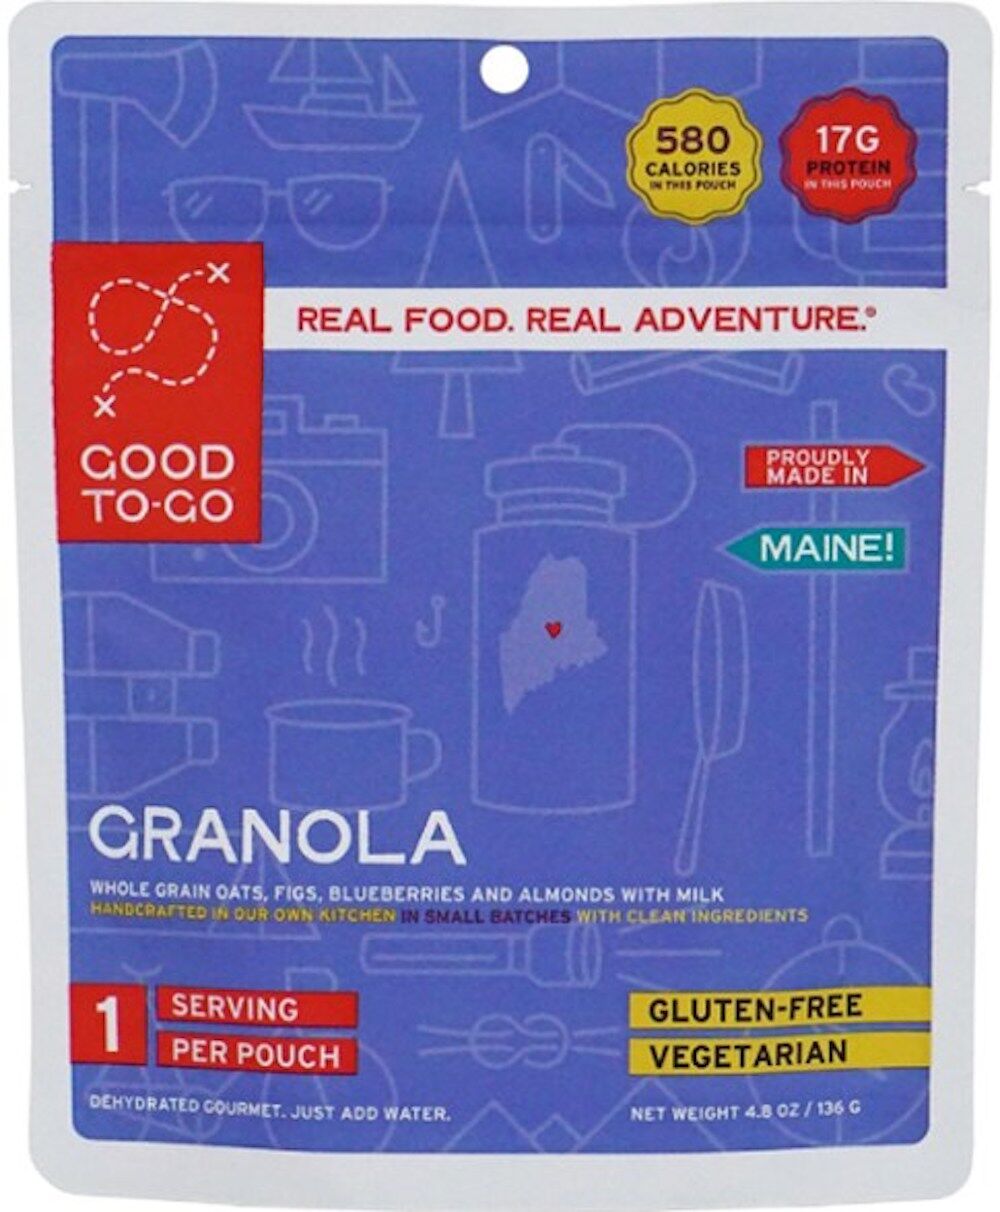 Good To-Go granola in a purple package with red label